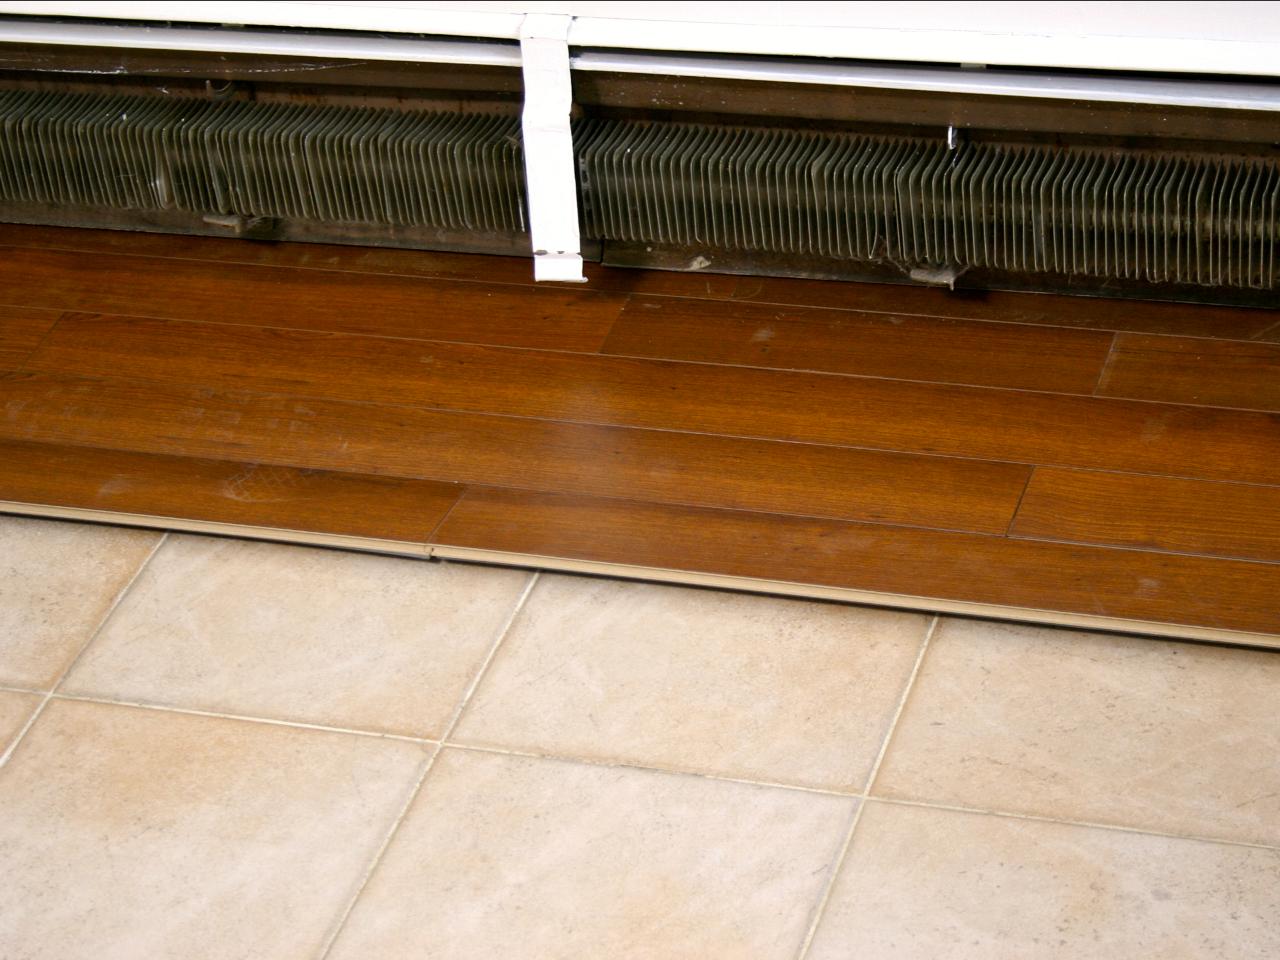 How To Install Lock Wood Flooring, How To Lay Snap On Wood Flooring